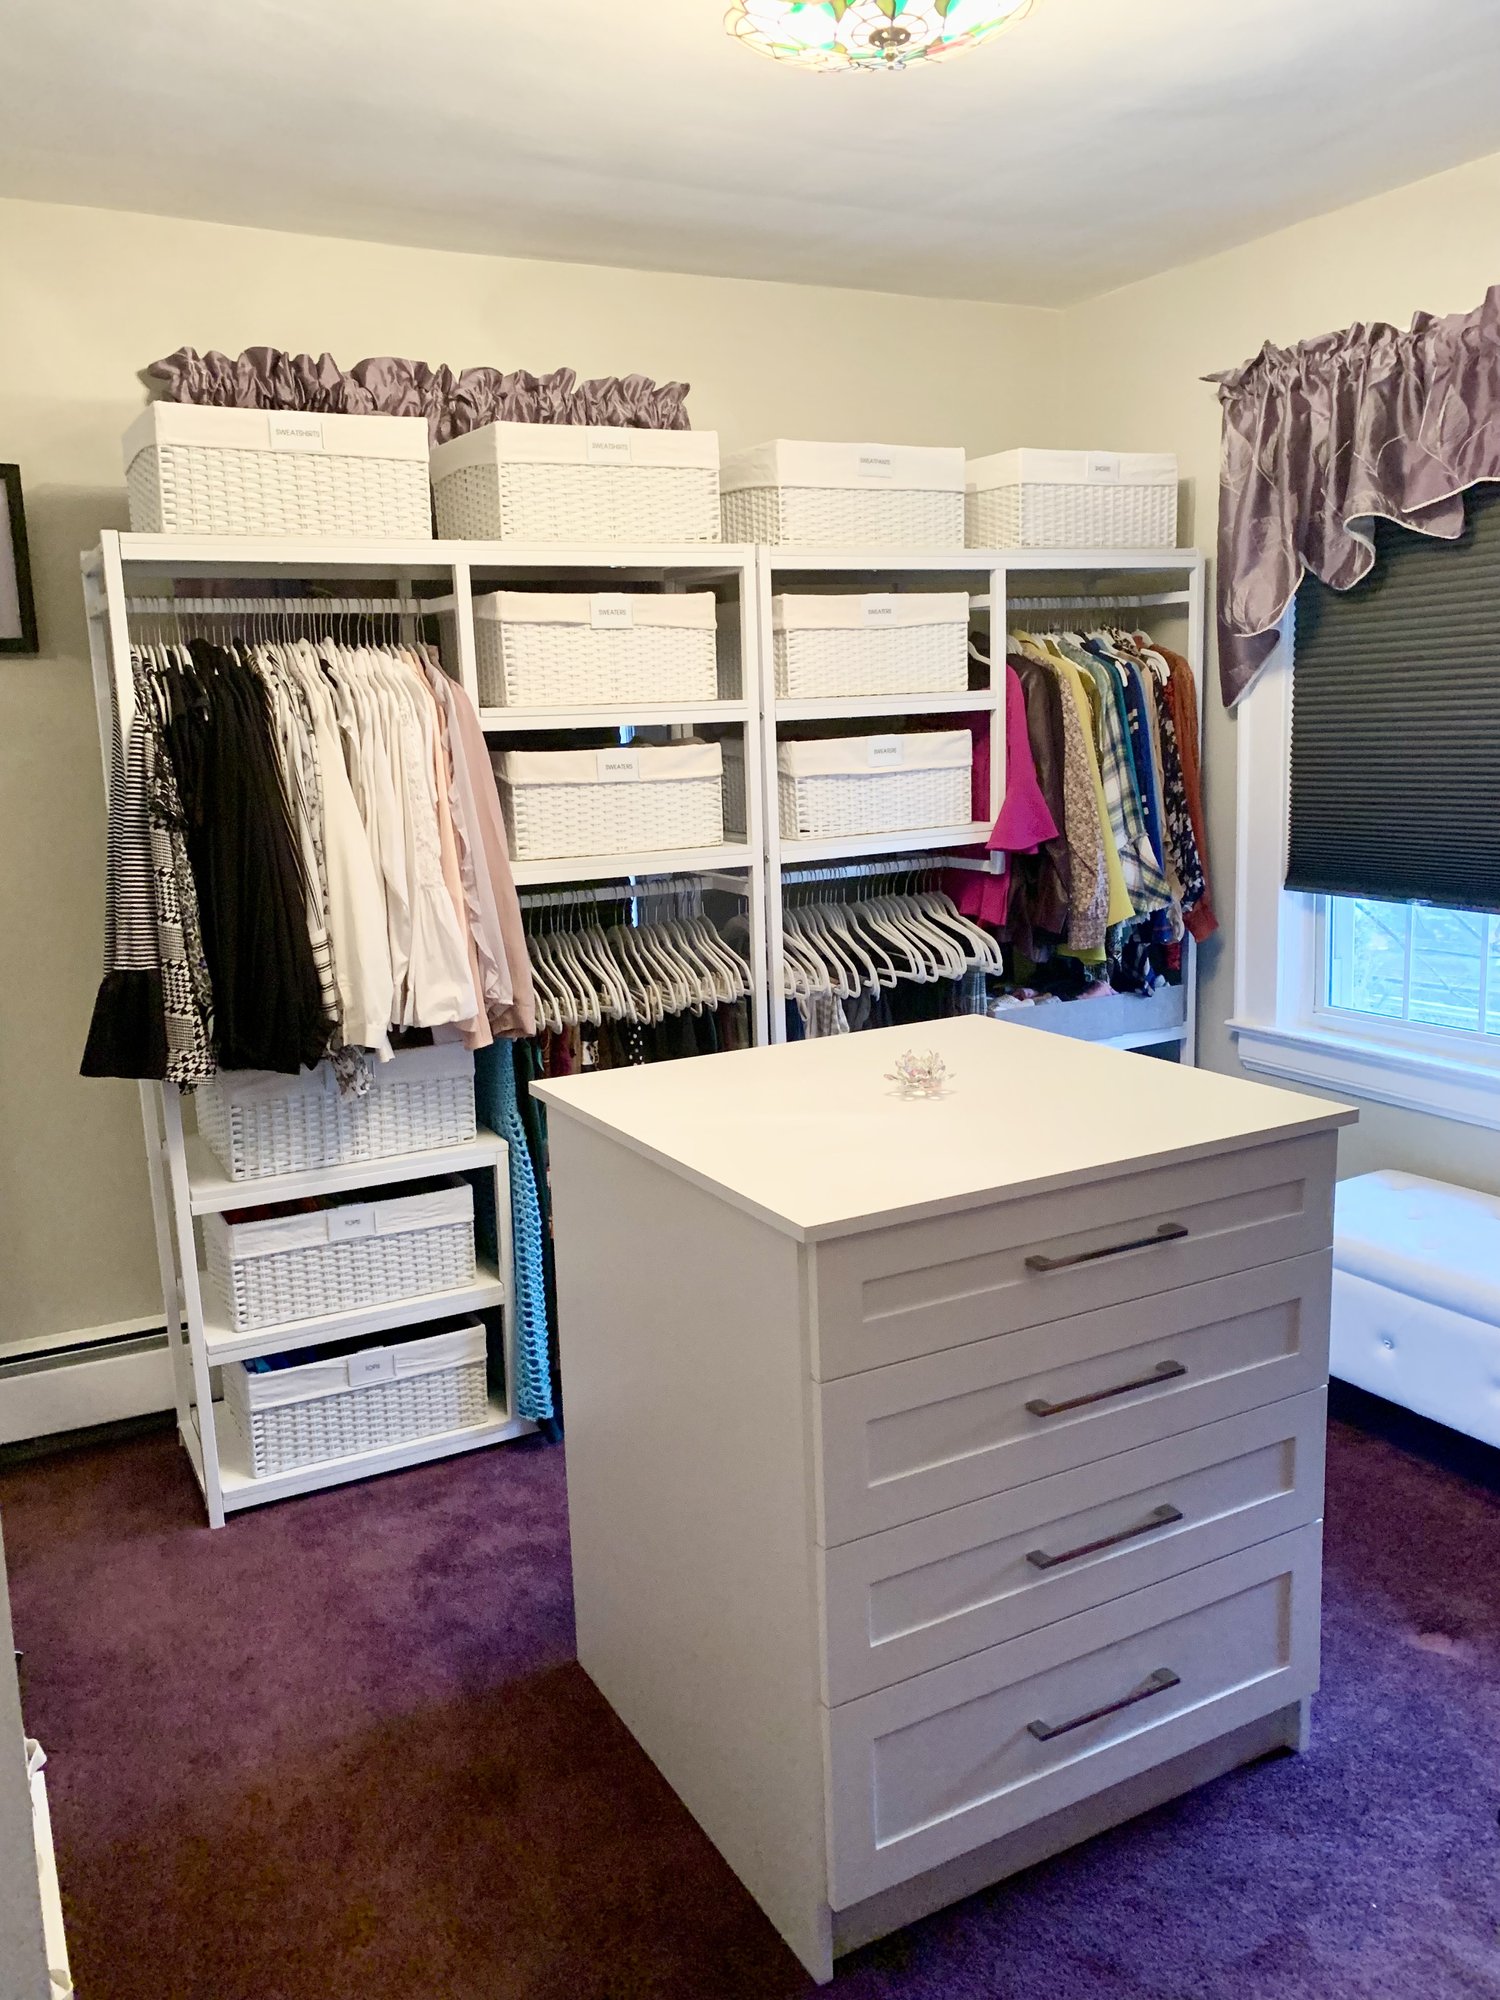 These closet organizers clear clutter and maximize my space